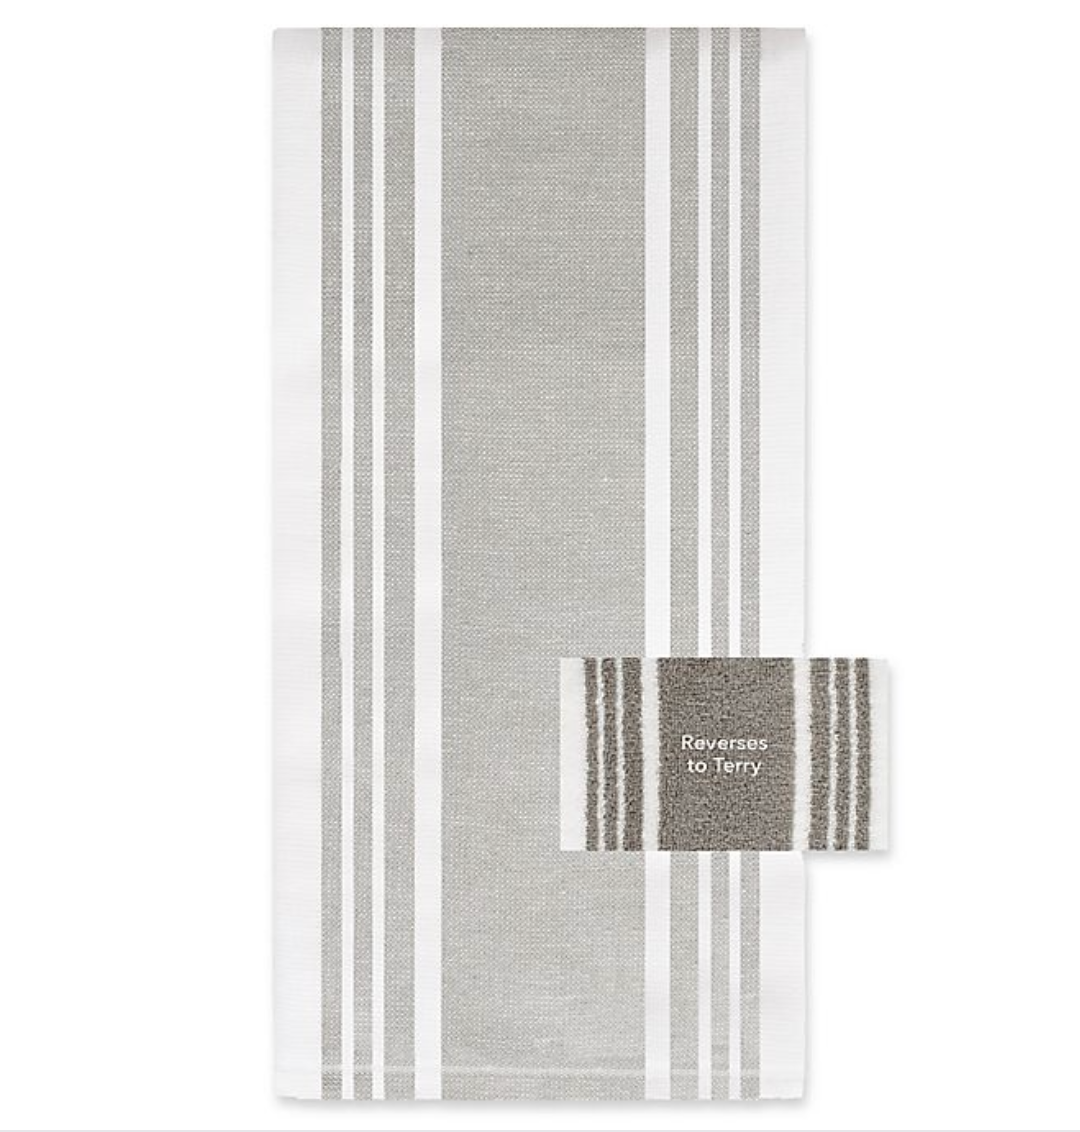 All-Clad Solid Kitchen Towel, Pewter